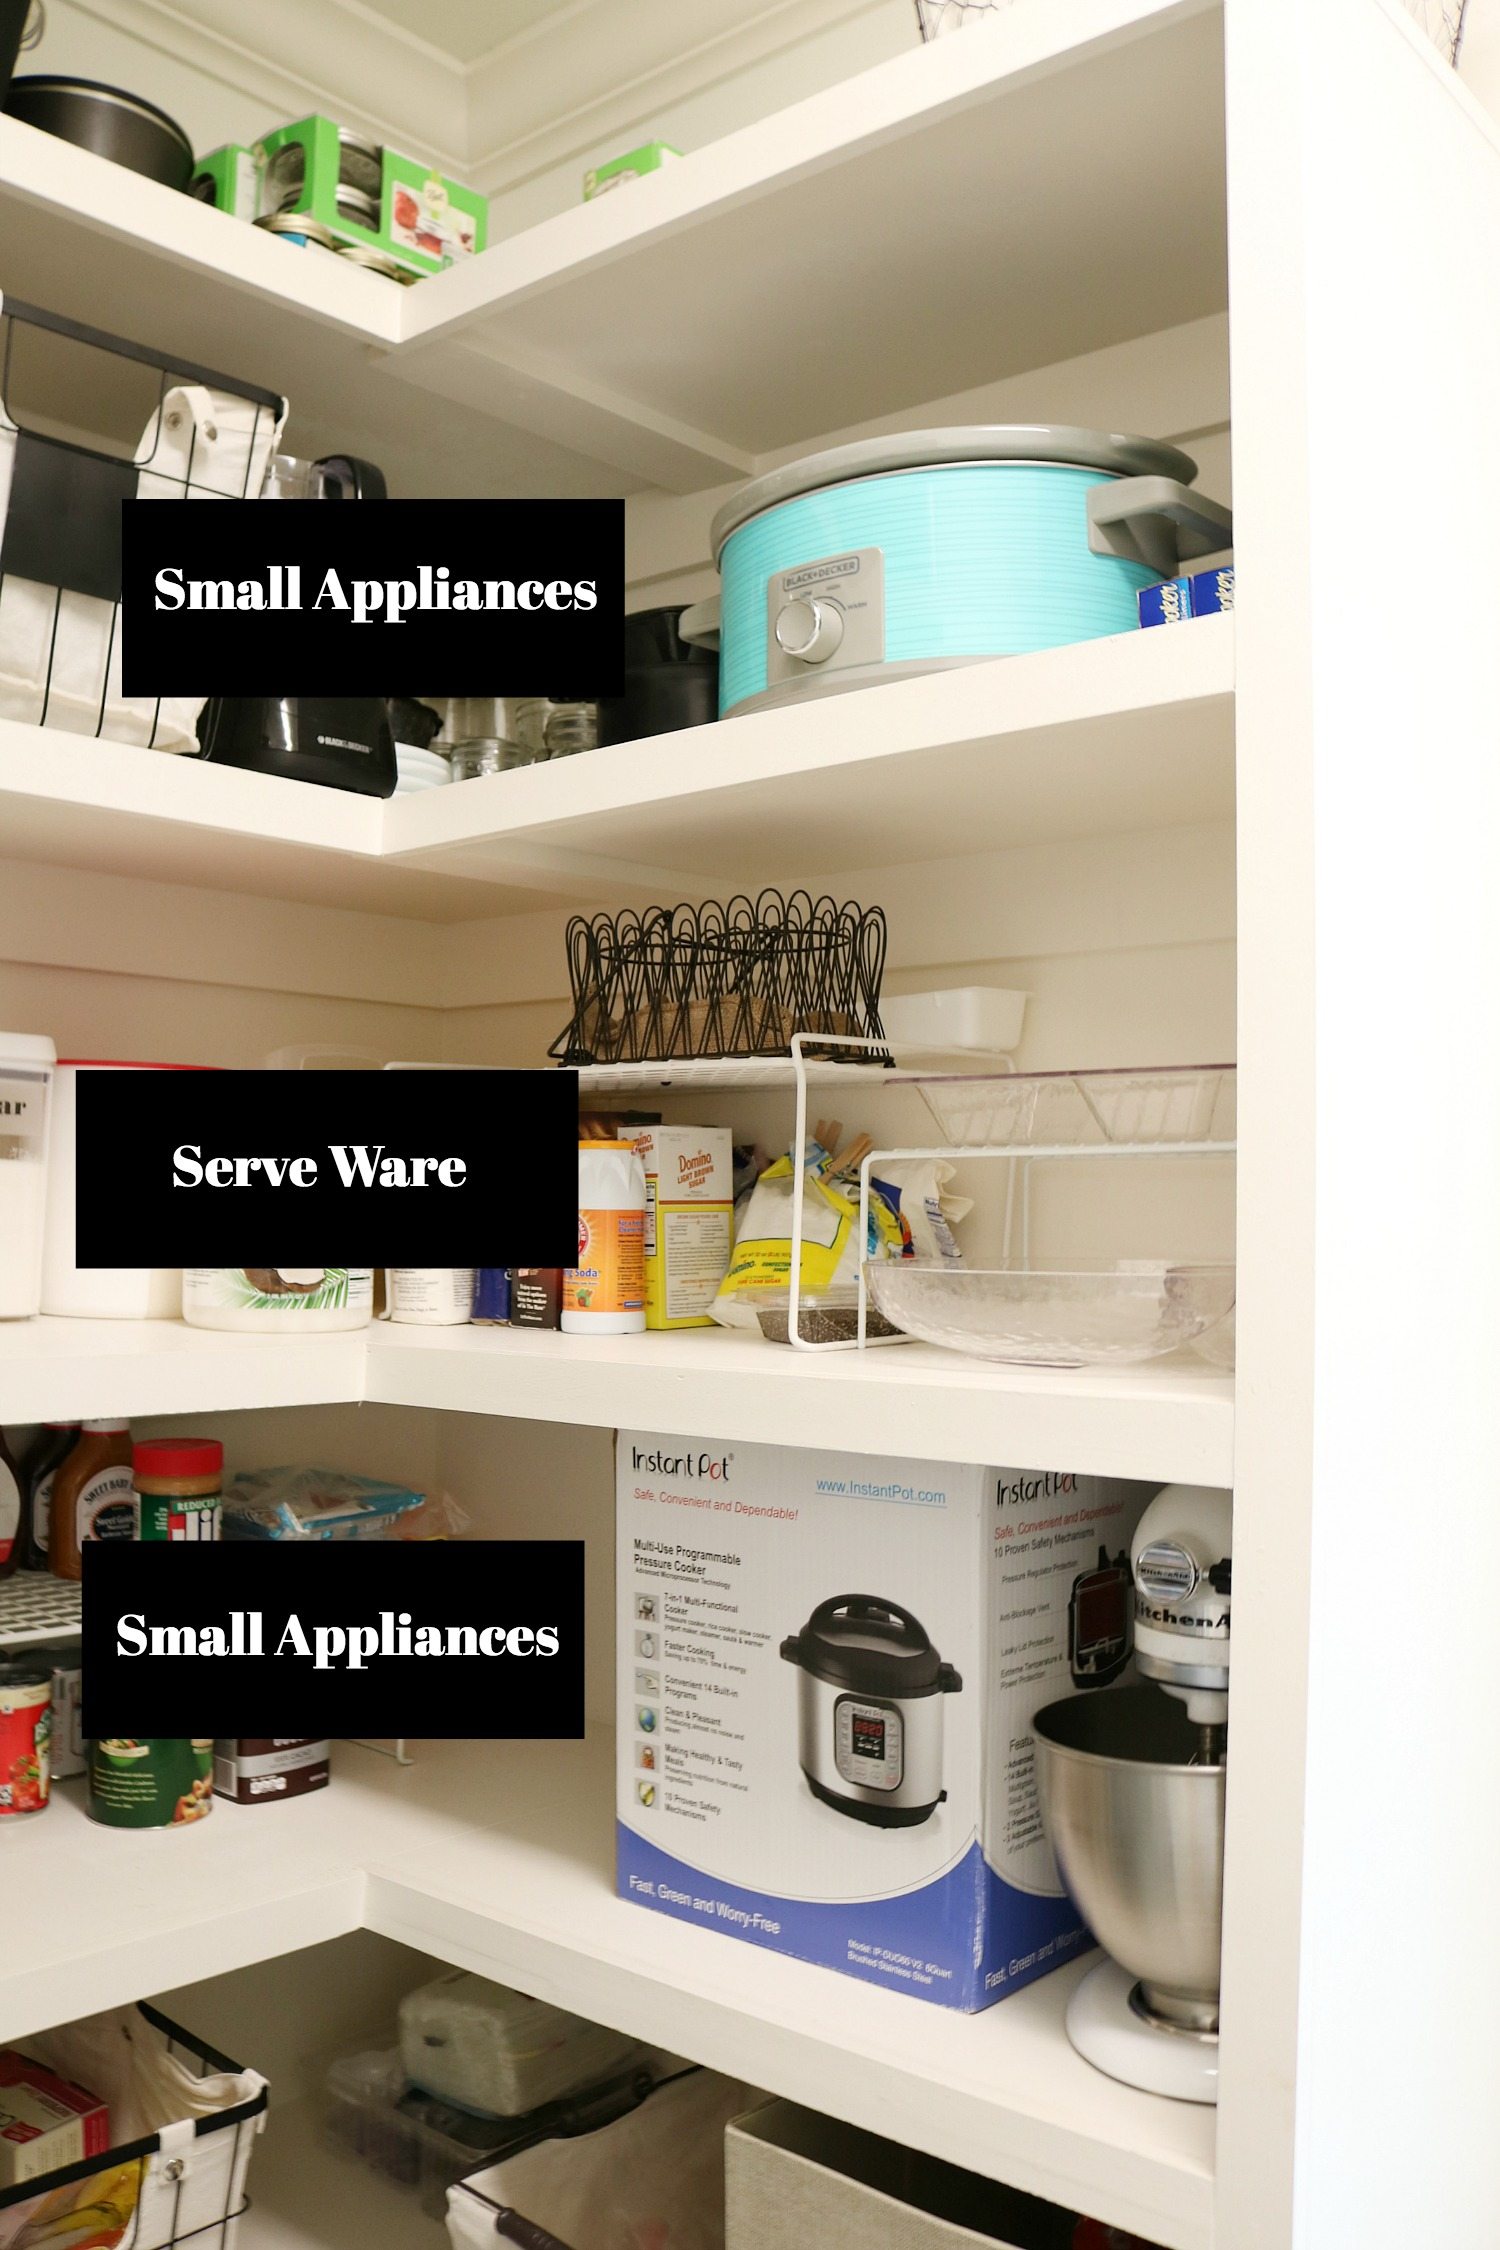 Create a space in the pantry for small appliances and serve ware